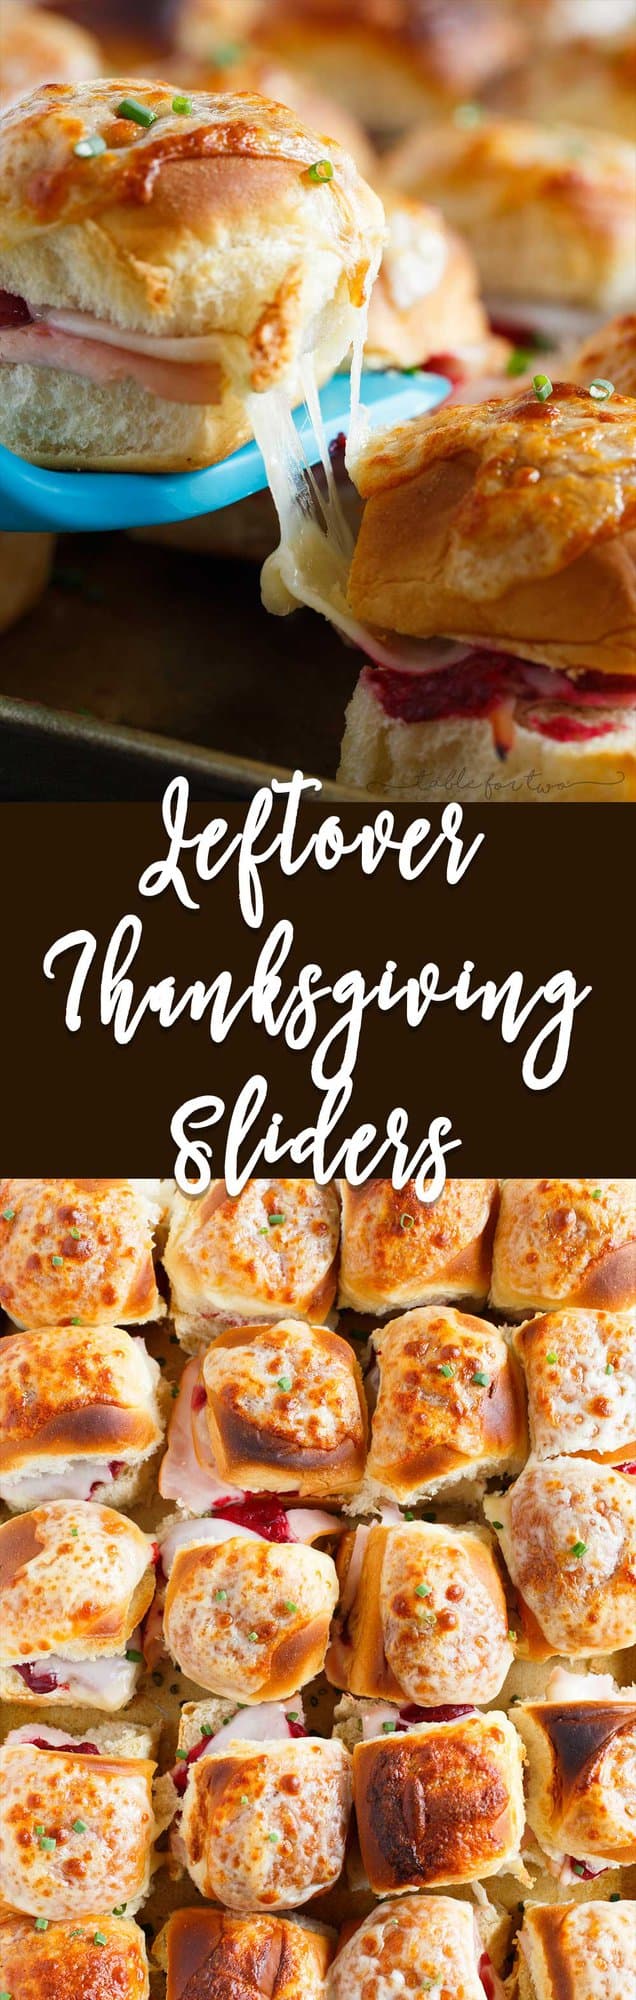 Give Thanksgiving leftovers life again by making these Leftover Thanksgiving Turkey Sliders! An easy and delicious way to use up your Thanksgiving turkey & leftovers!